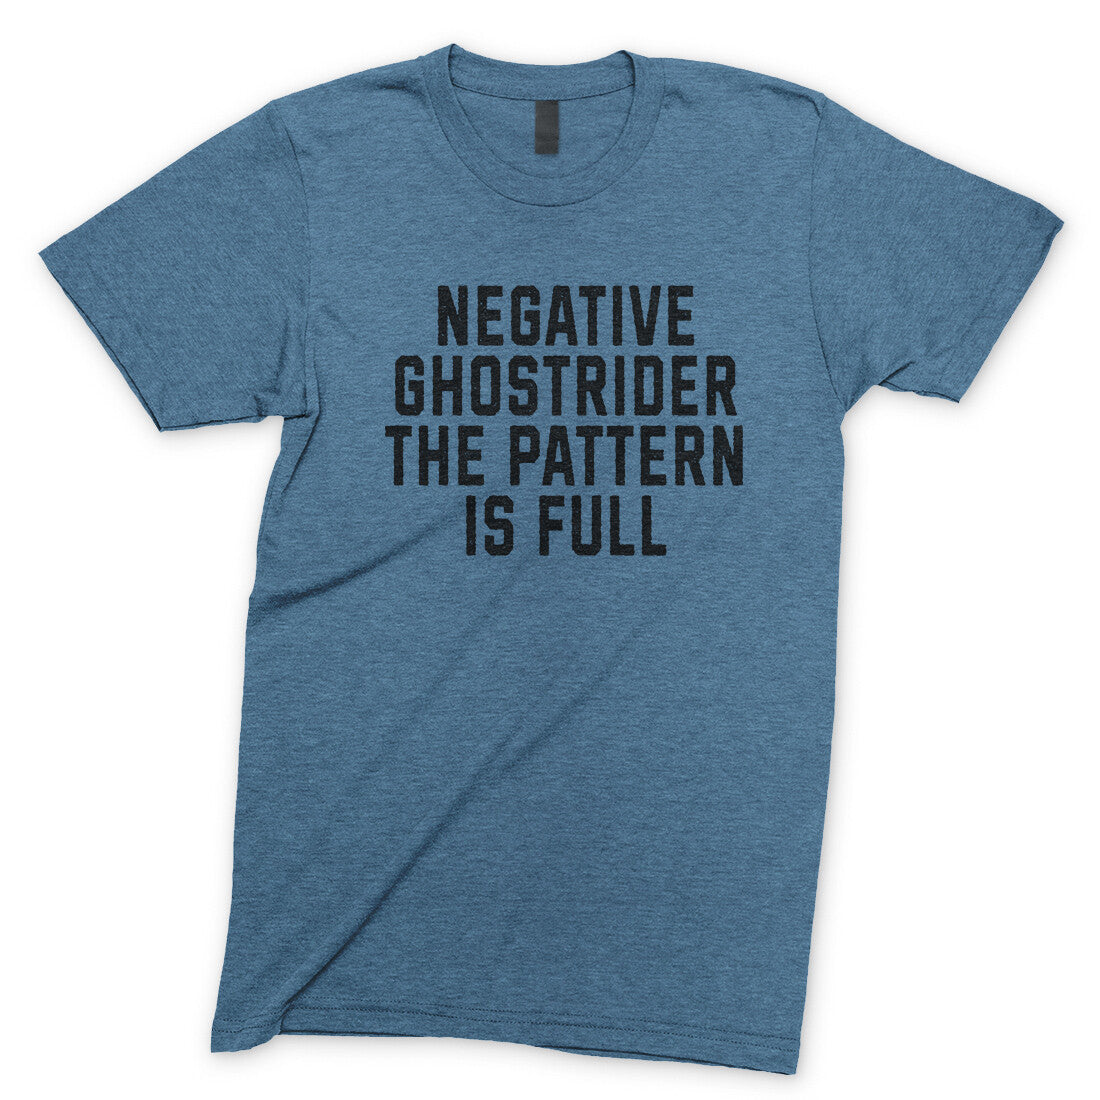 Negative Ghostrider the Pattern is Full in Heather Indigo Color